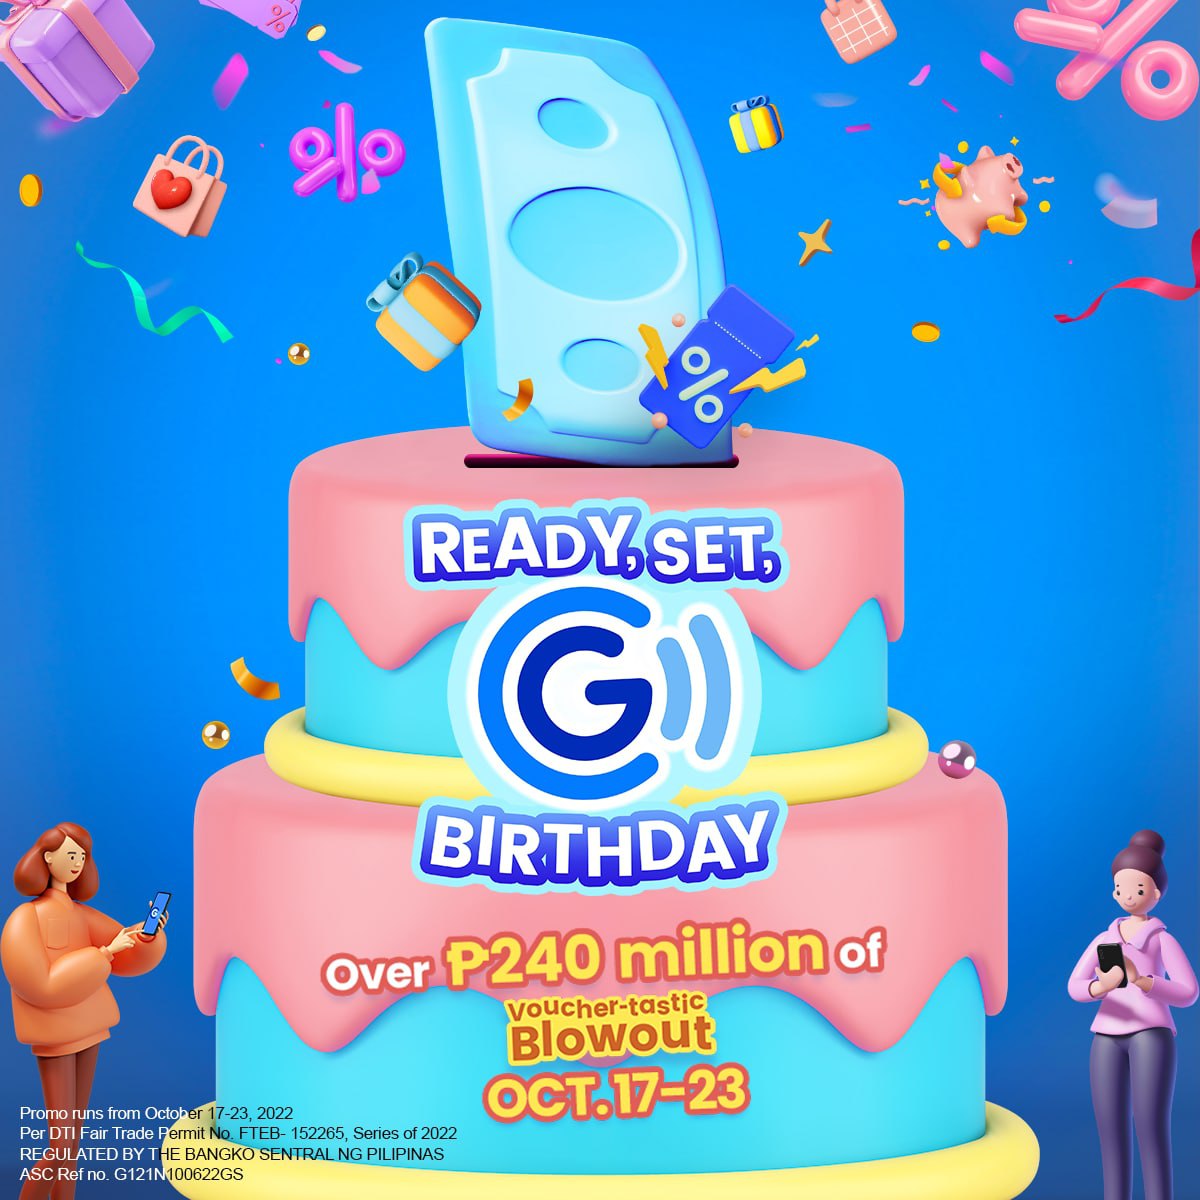 Mark Your Calendars, It’s GCash’s Birthday! On October 17 to 23, GCash is celebrating its Birthday with Bigger Rewards and Exciting Deals